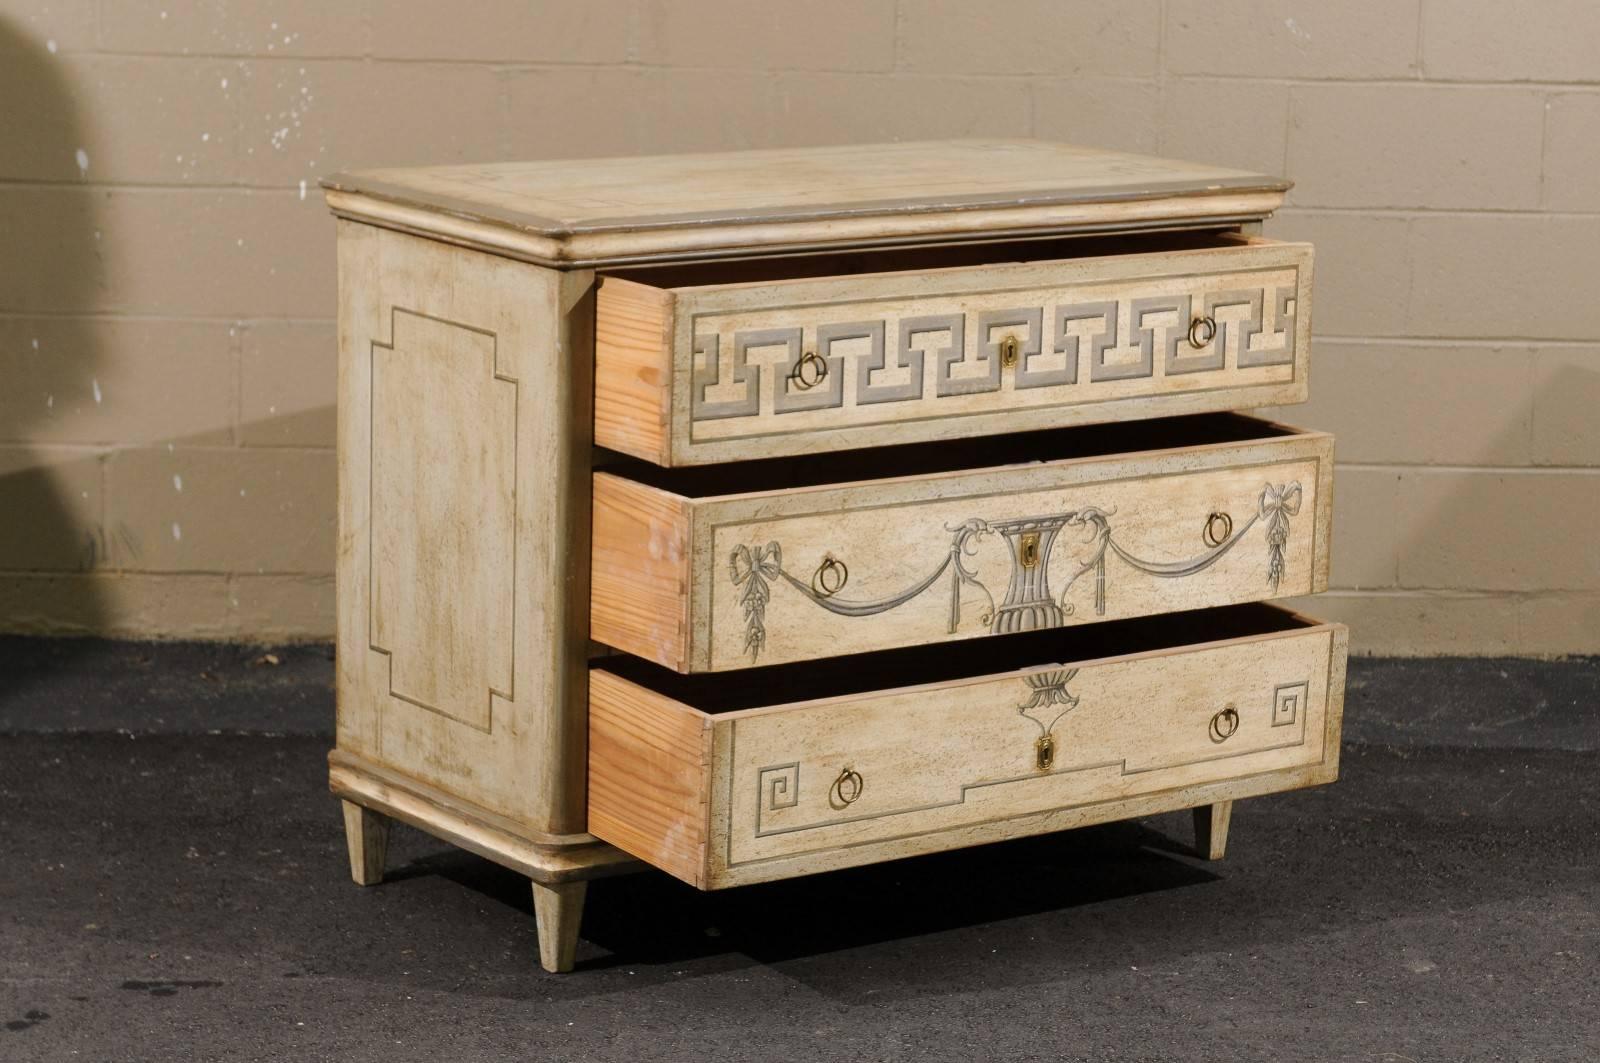 German, Mid-19th Century Neoclassical Style Painted Wood Commode with Greek Key 3